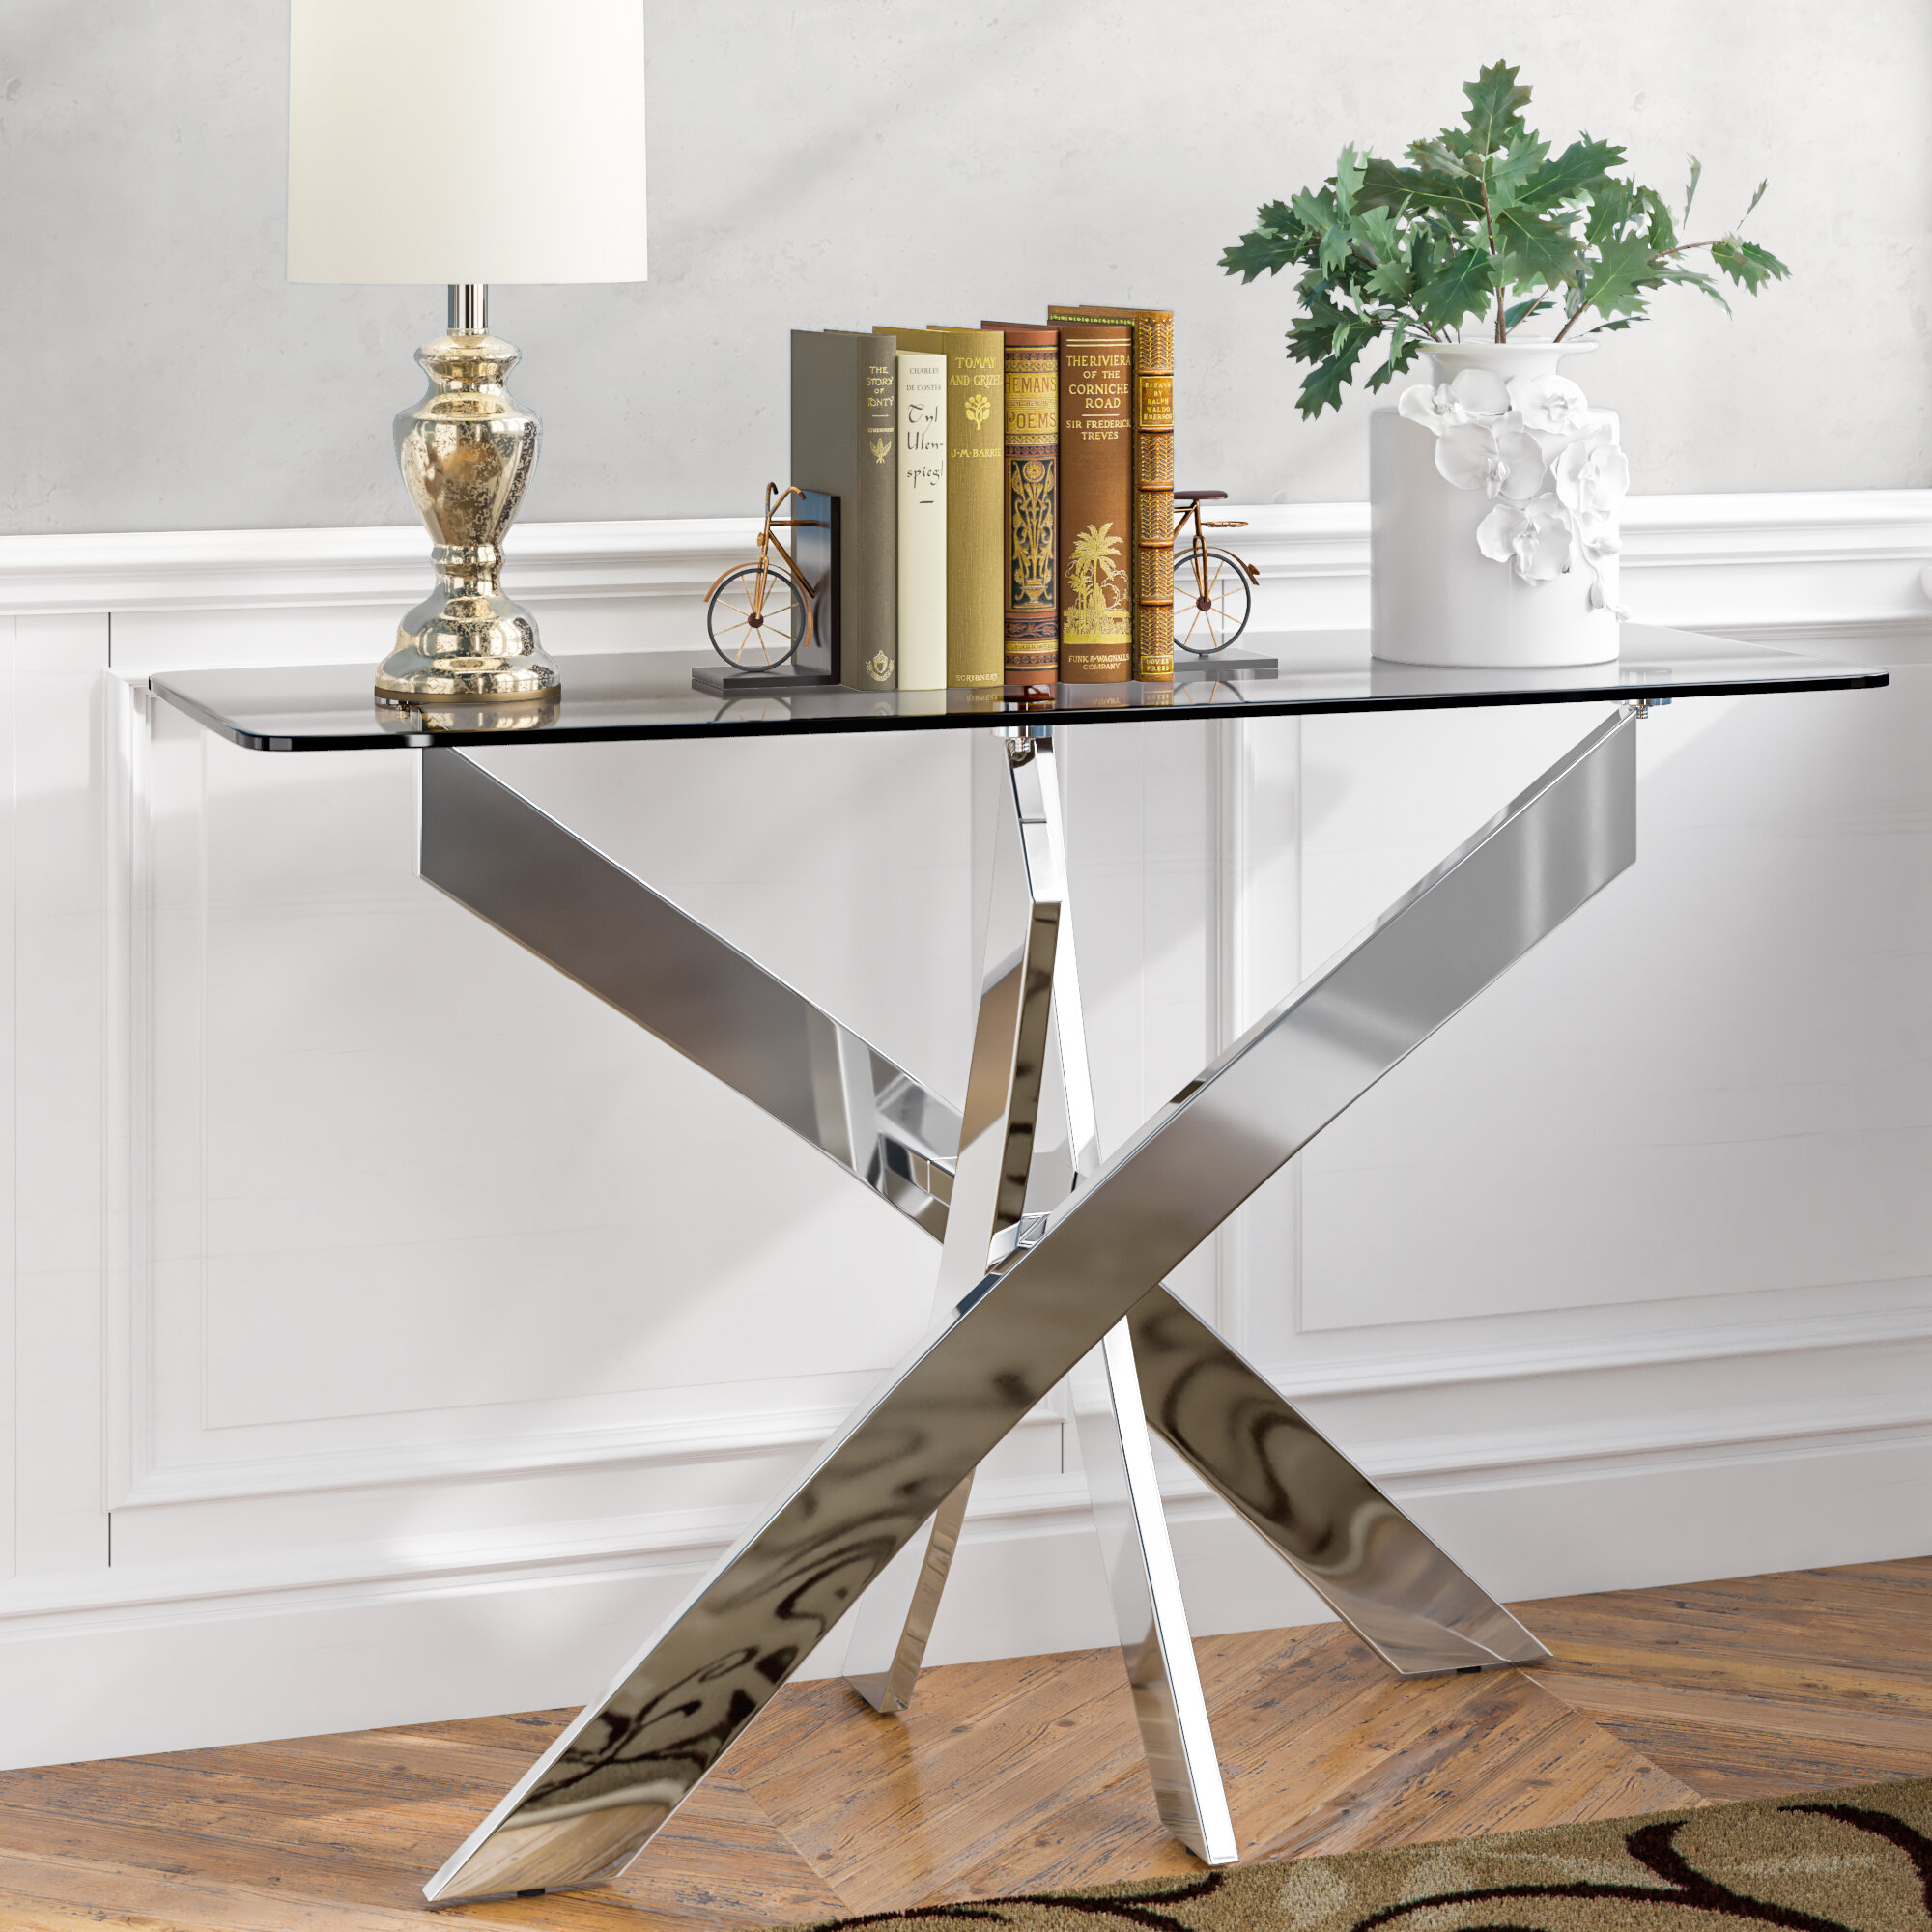  SICOTAS Glass Console Table with Shelves - Modern Glass  Entryway Table with Chrome Leg - Accent Narrow Silver Console Table for  Living Room, Sofa Table and Hallway Entry Table, Easy Assembly